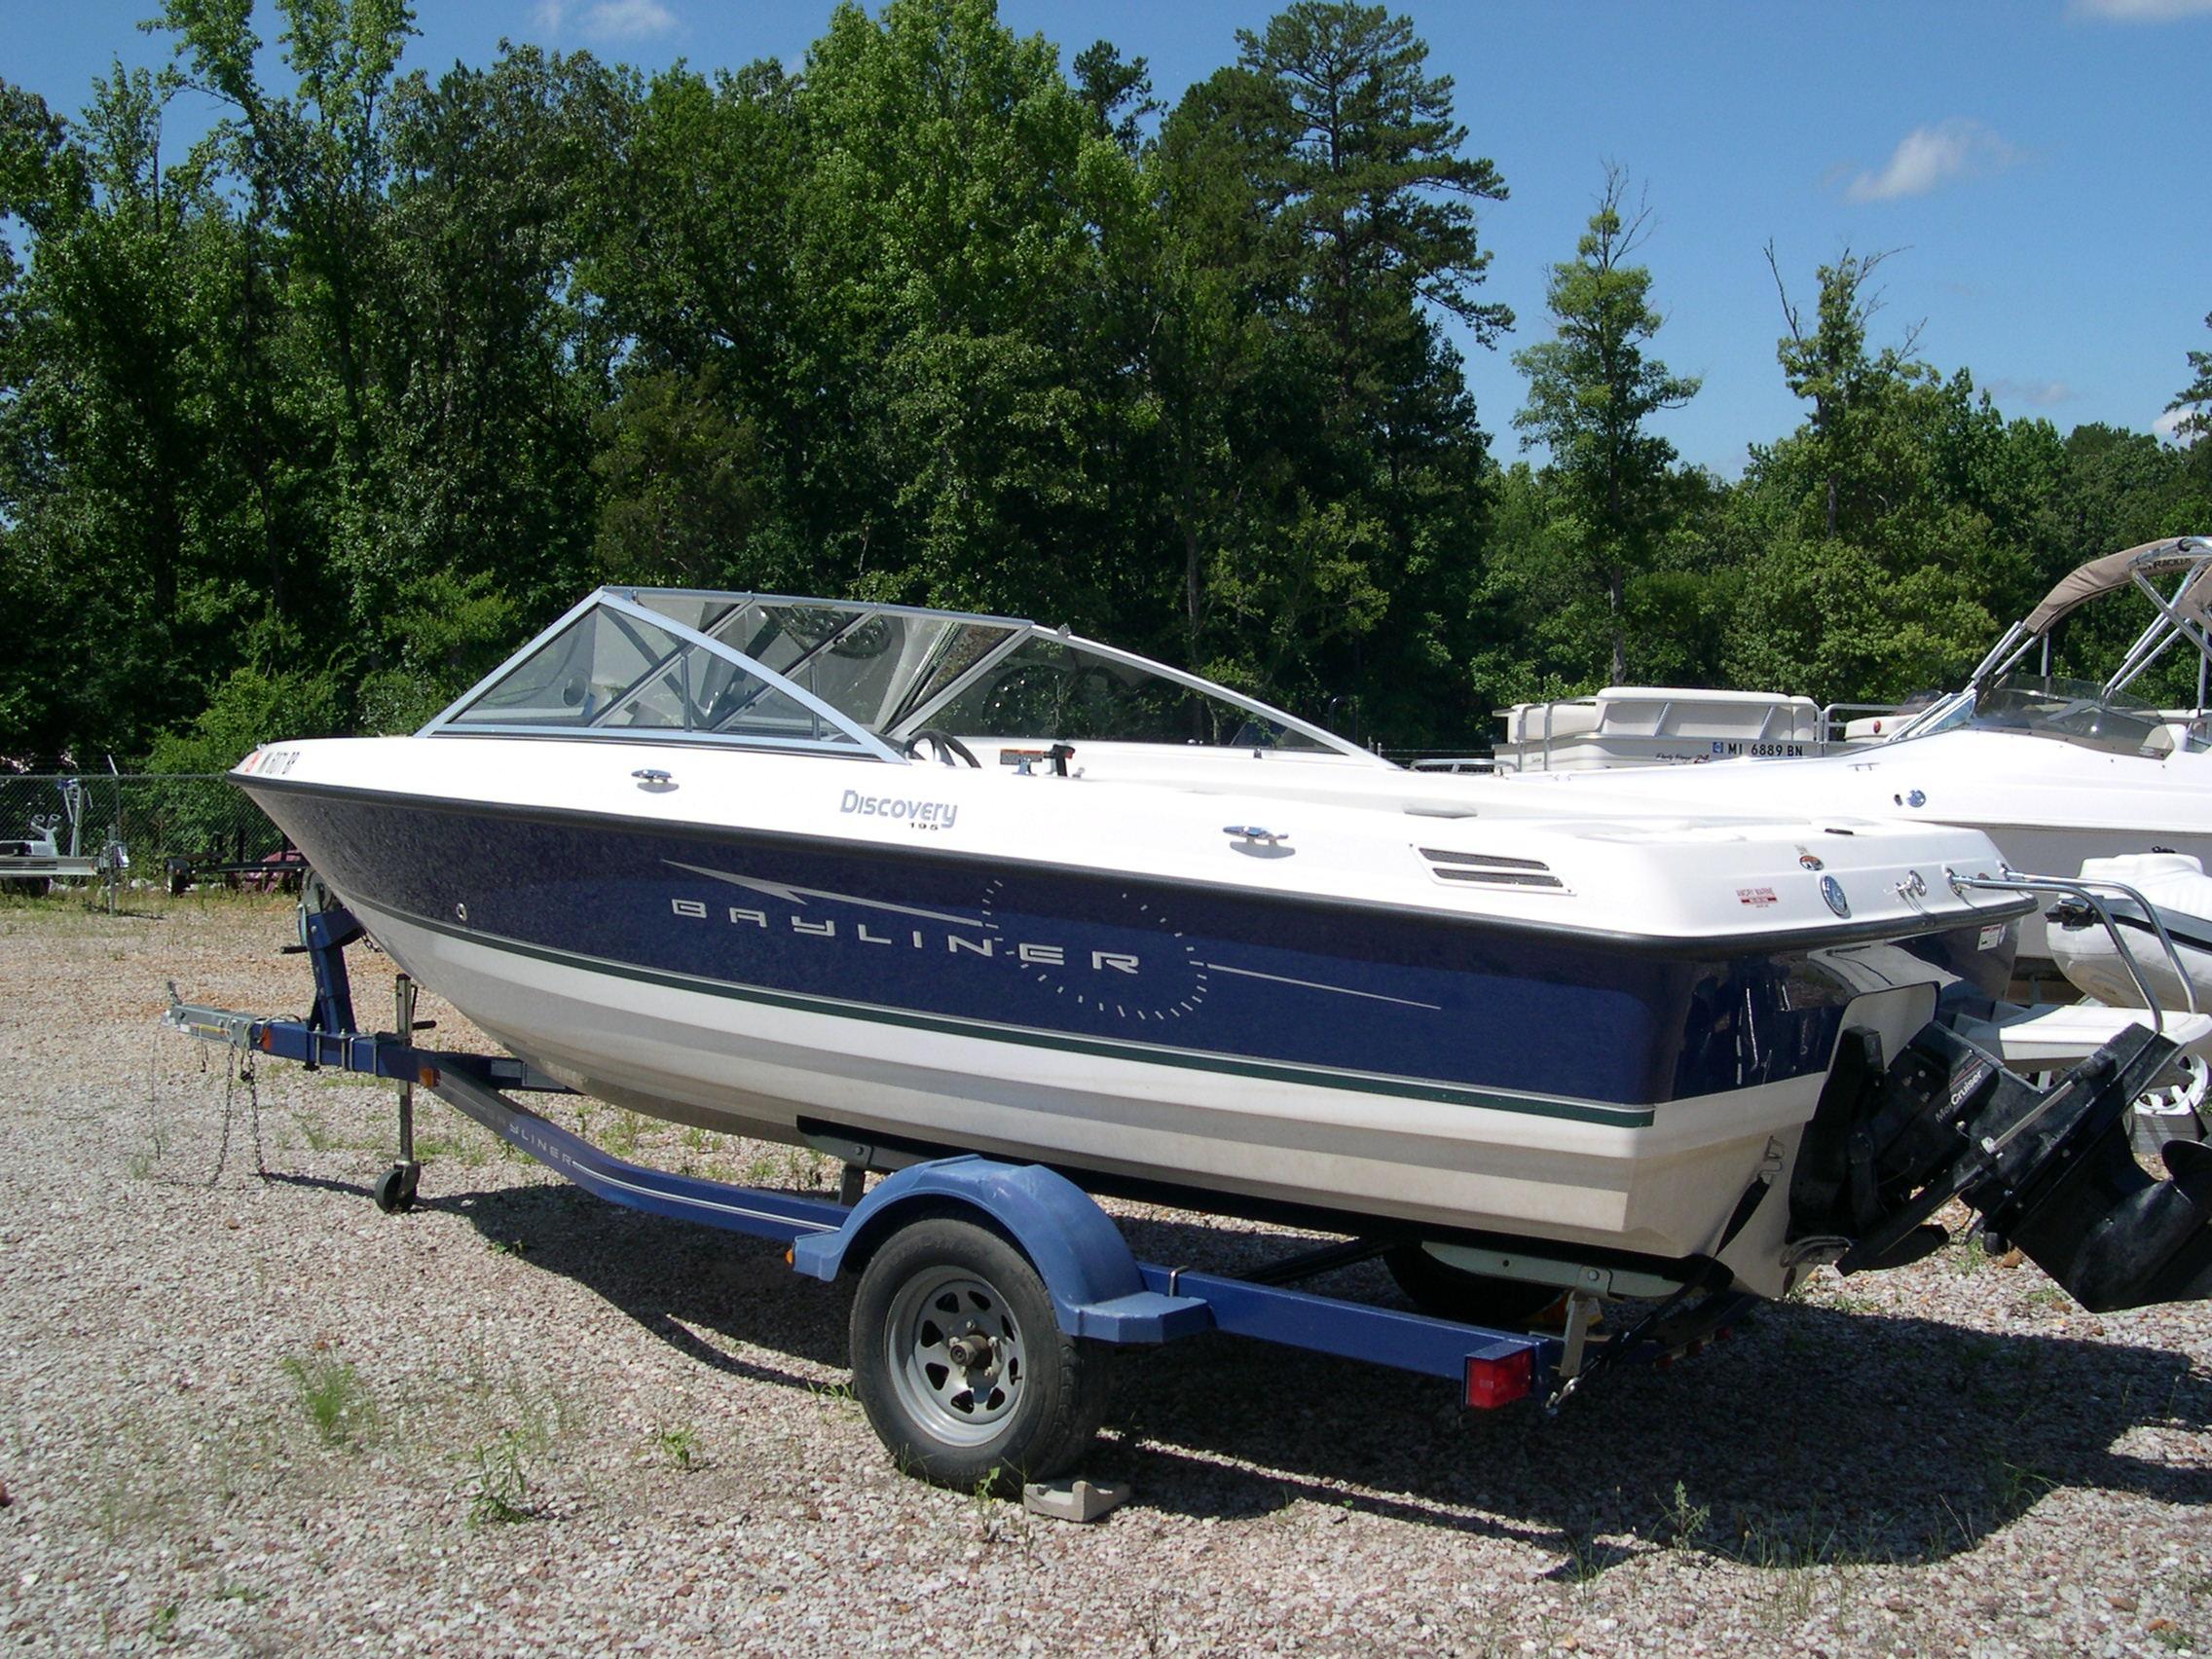 Bayliner Discovery 195, Counce